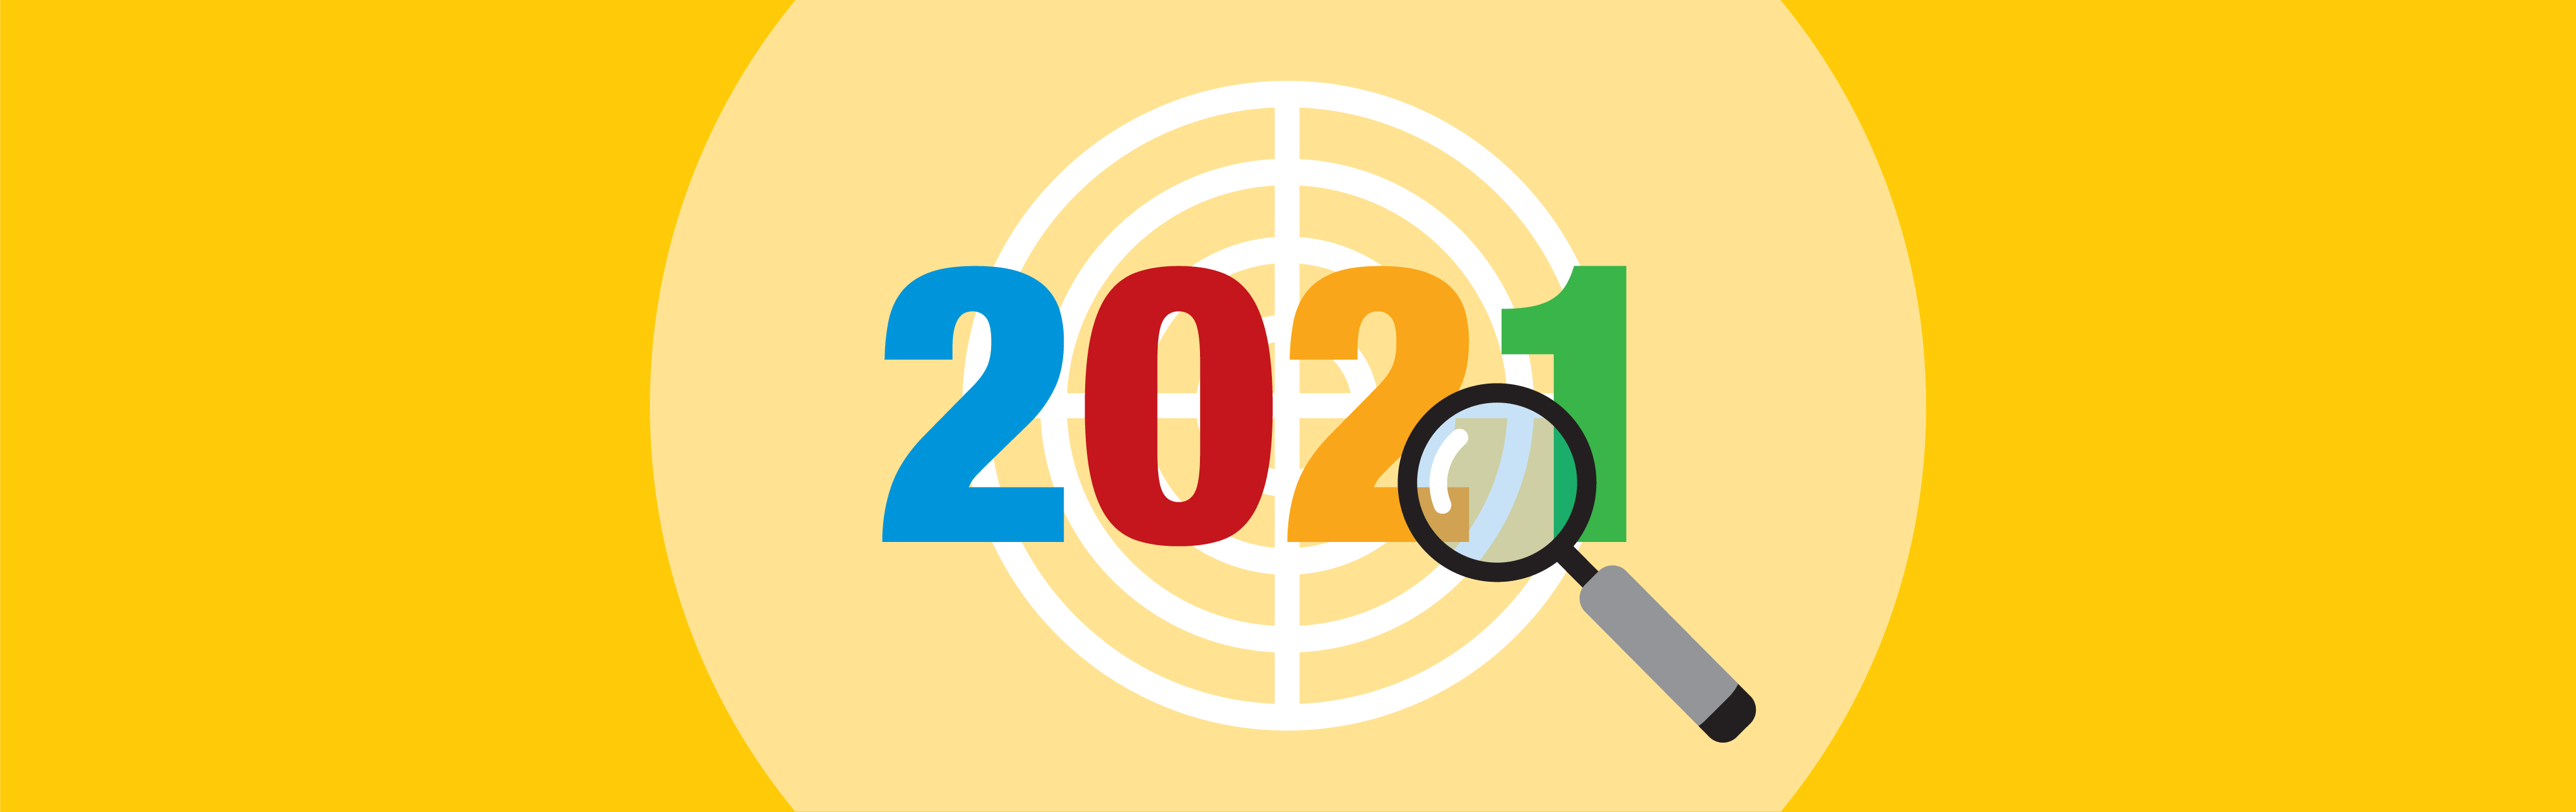 Google 2021 Ranking under the magnifying glass